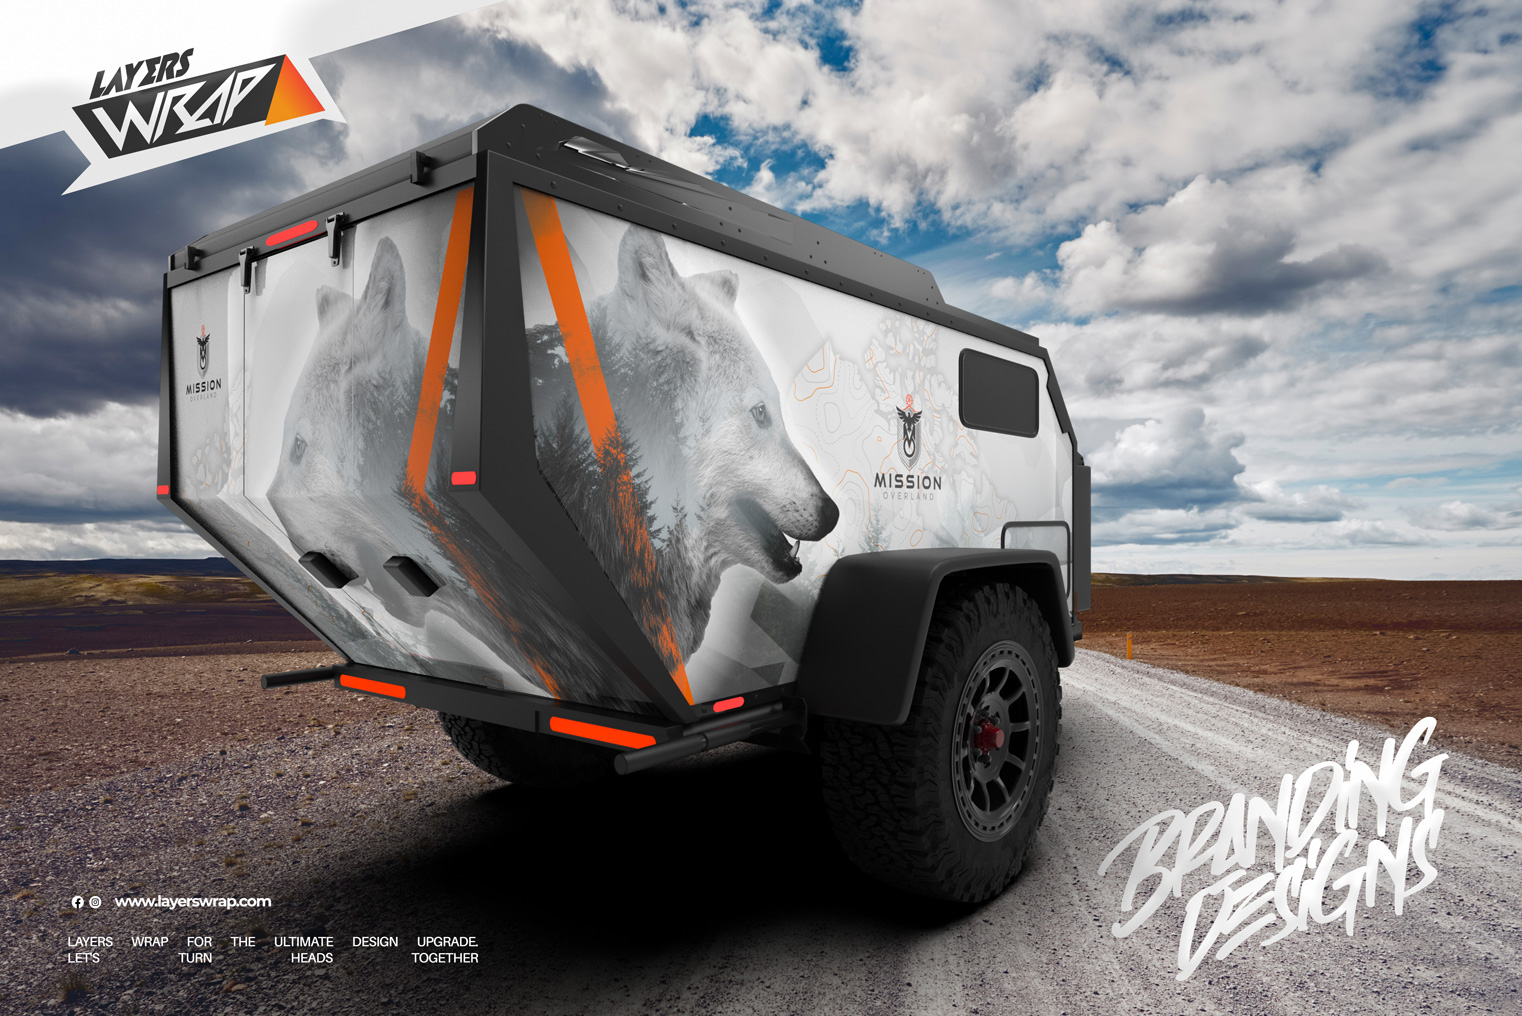 Outstanding Adventure Wrap Design for Mission Overland | Layers Wrap